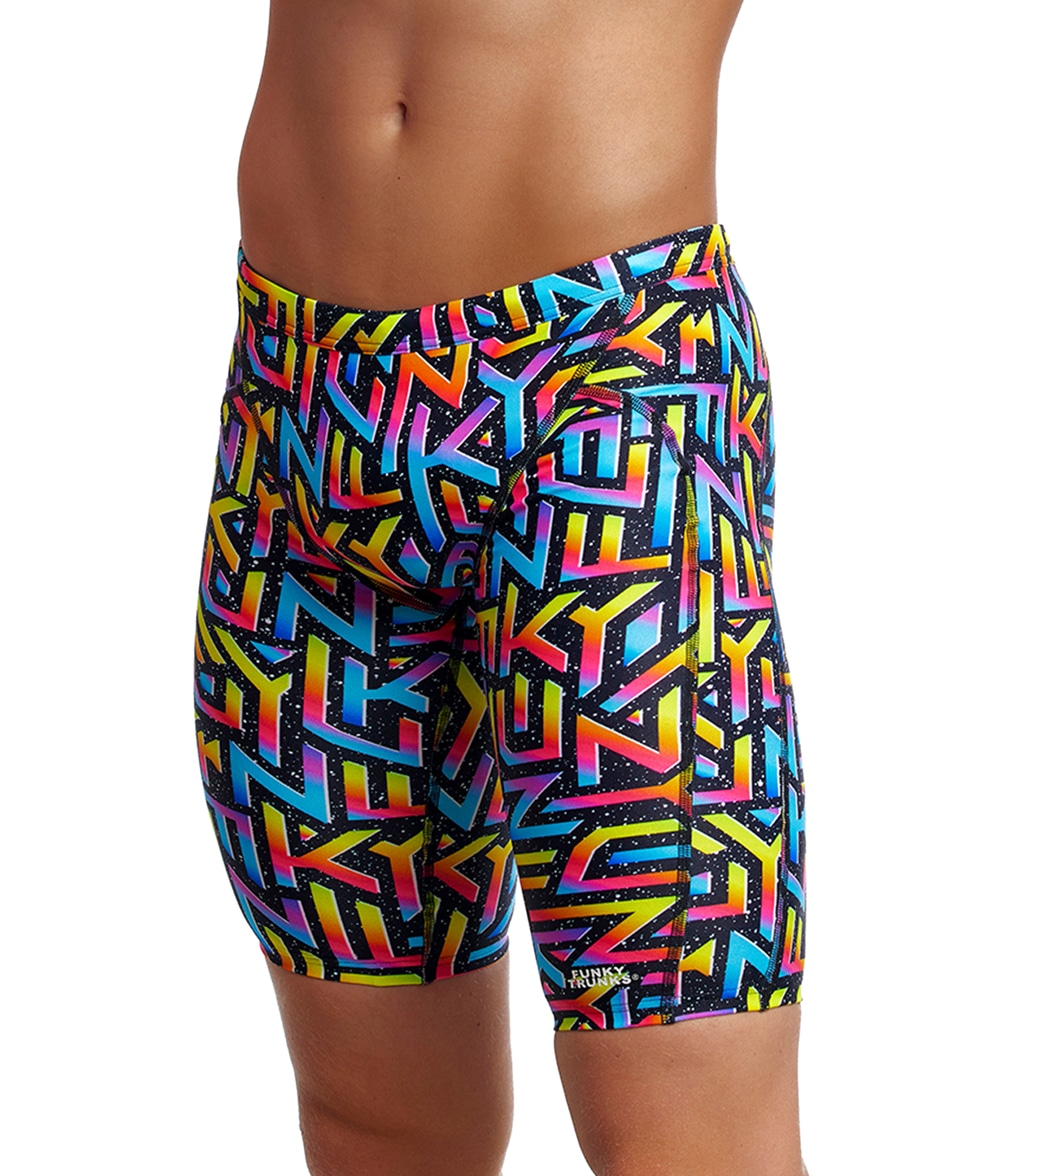 Funky Trunks Men's Brand Galaxy Training Jammer Swimsuit - 30 Polyester - Swimoutlet.com